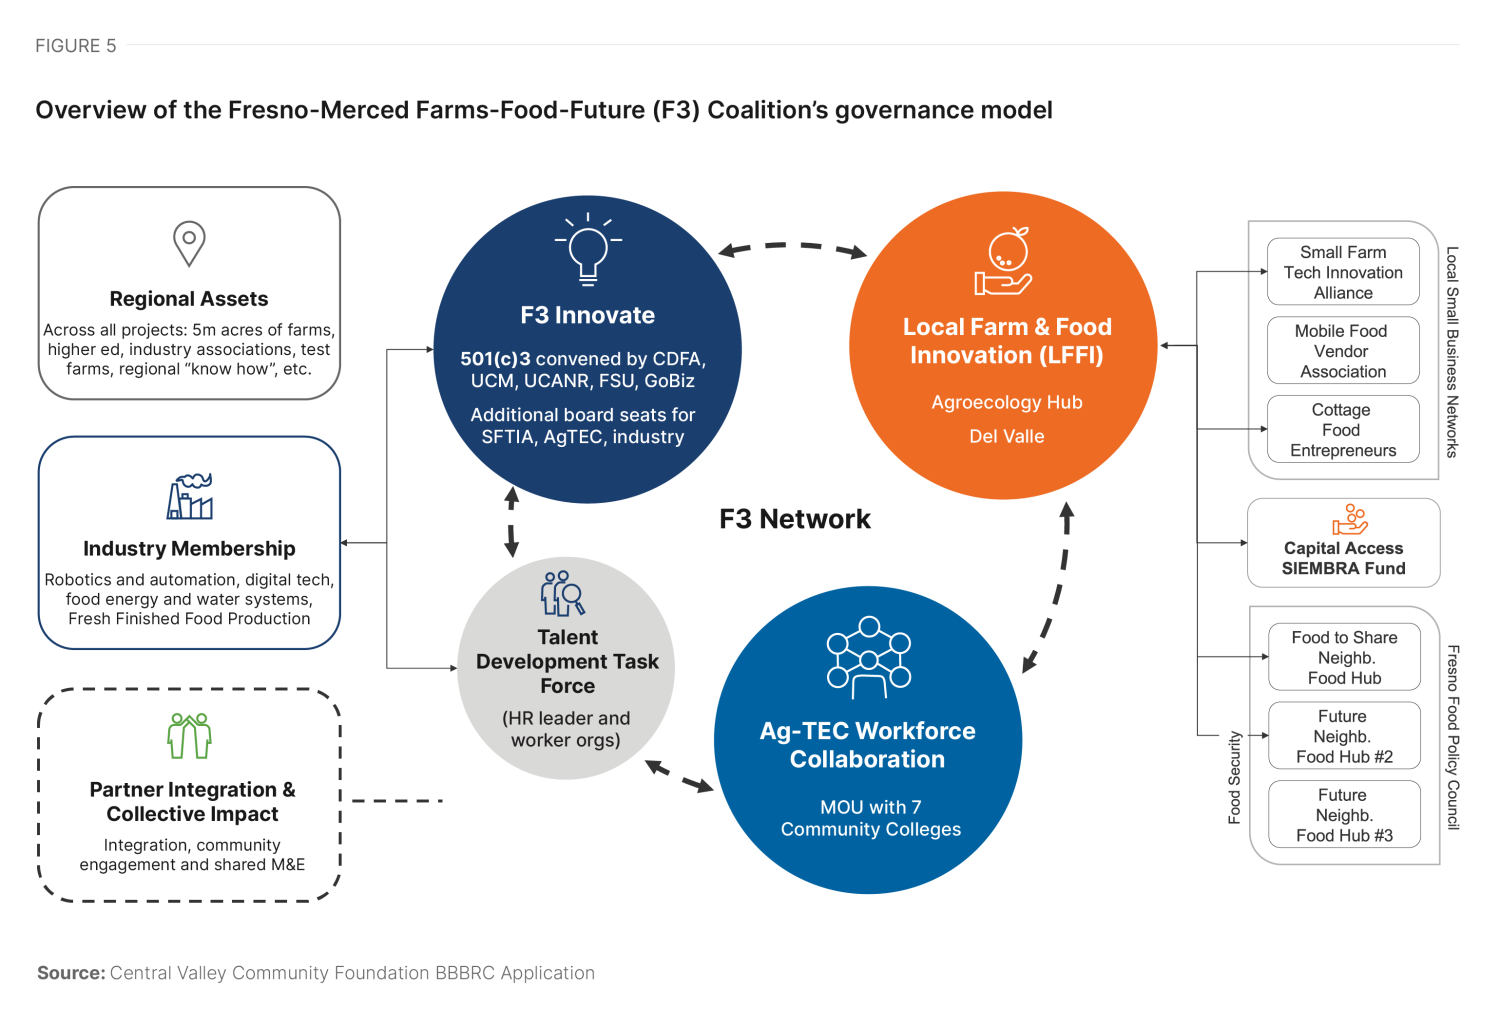 Figure 5. Overview of the Fresno-Merced Farms-Food-Future (F3) Coalition’s governance model